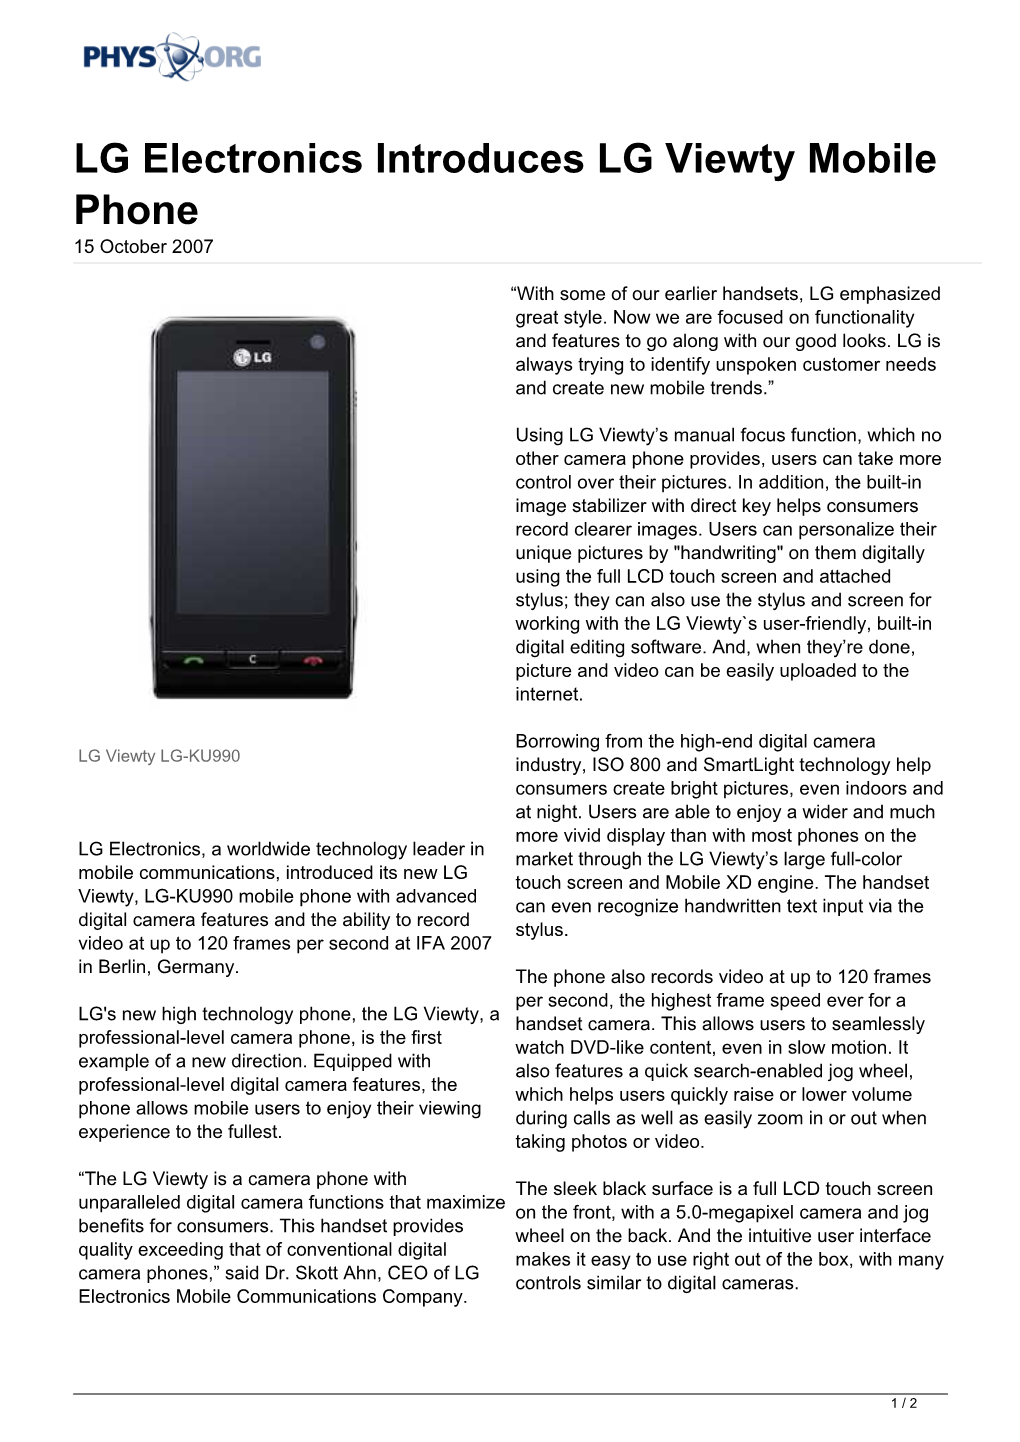 LG Electronics Introduces LG Viewty Mobile Phone 15 October 2007